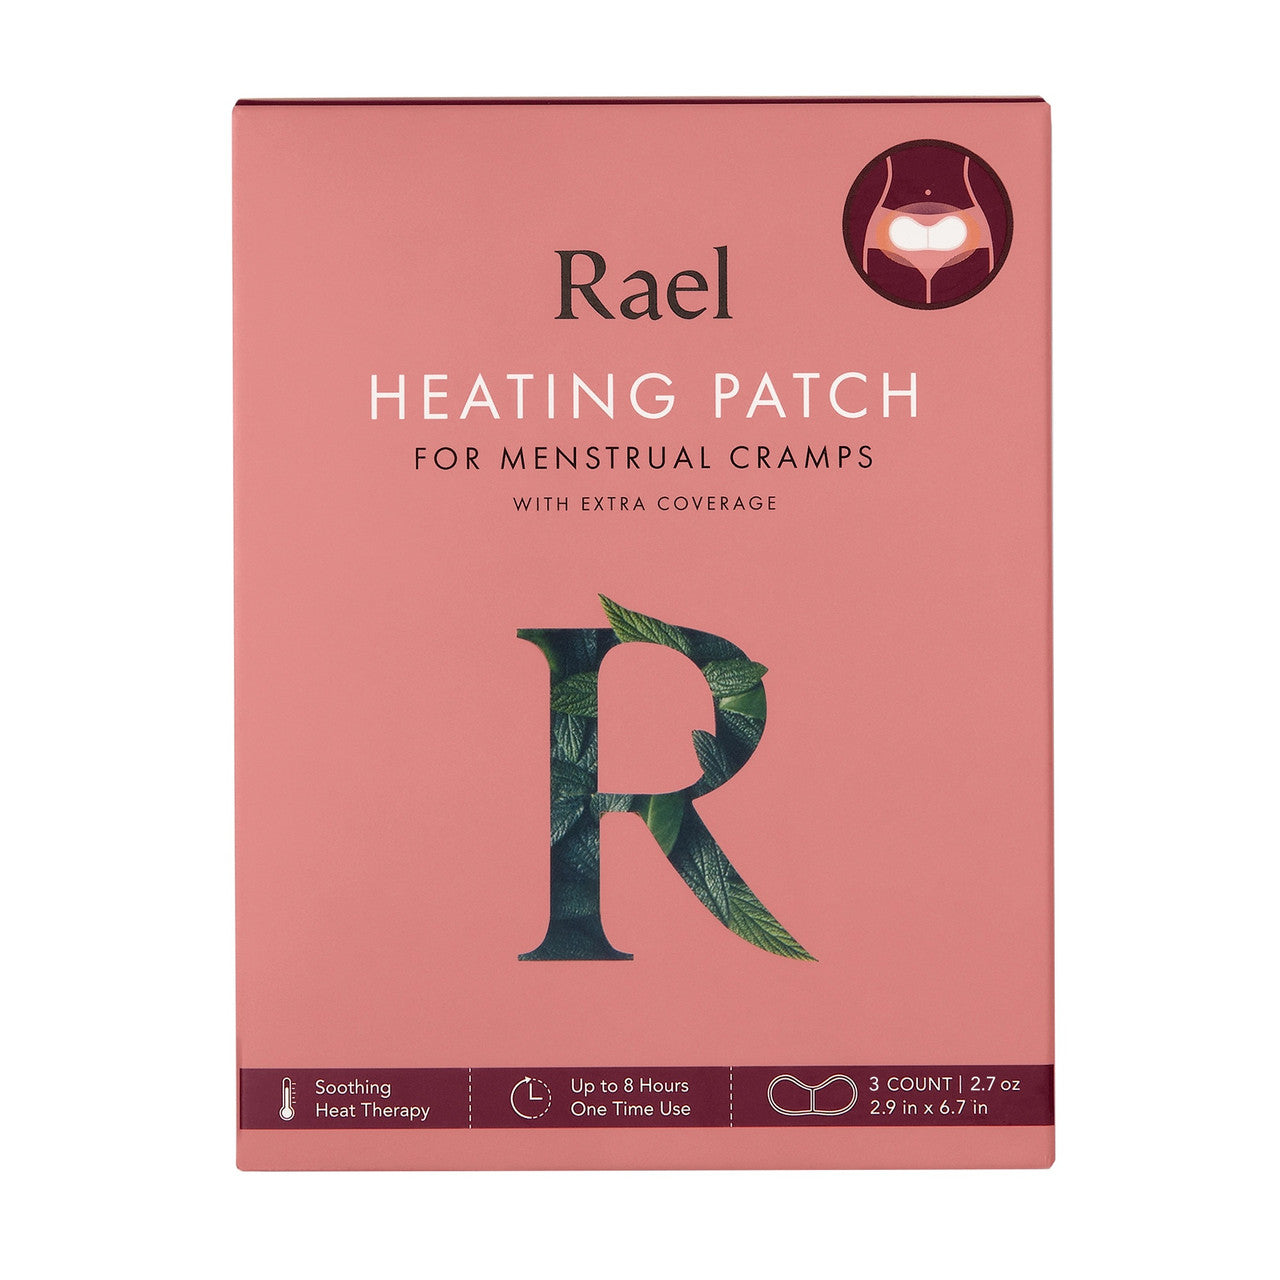 RAEL Heating Patch for Menstrual Cramps | 3 count